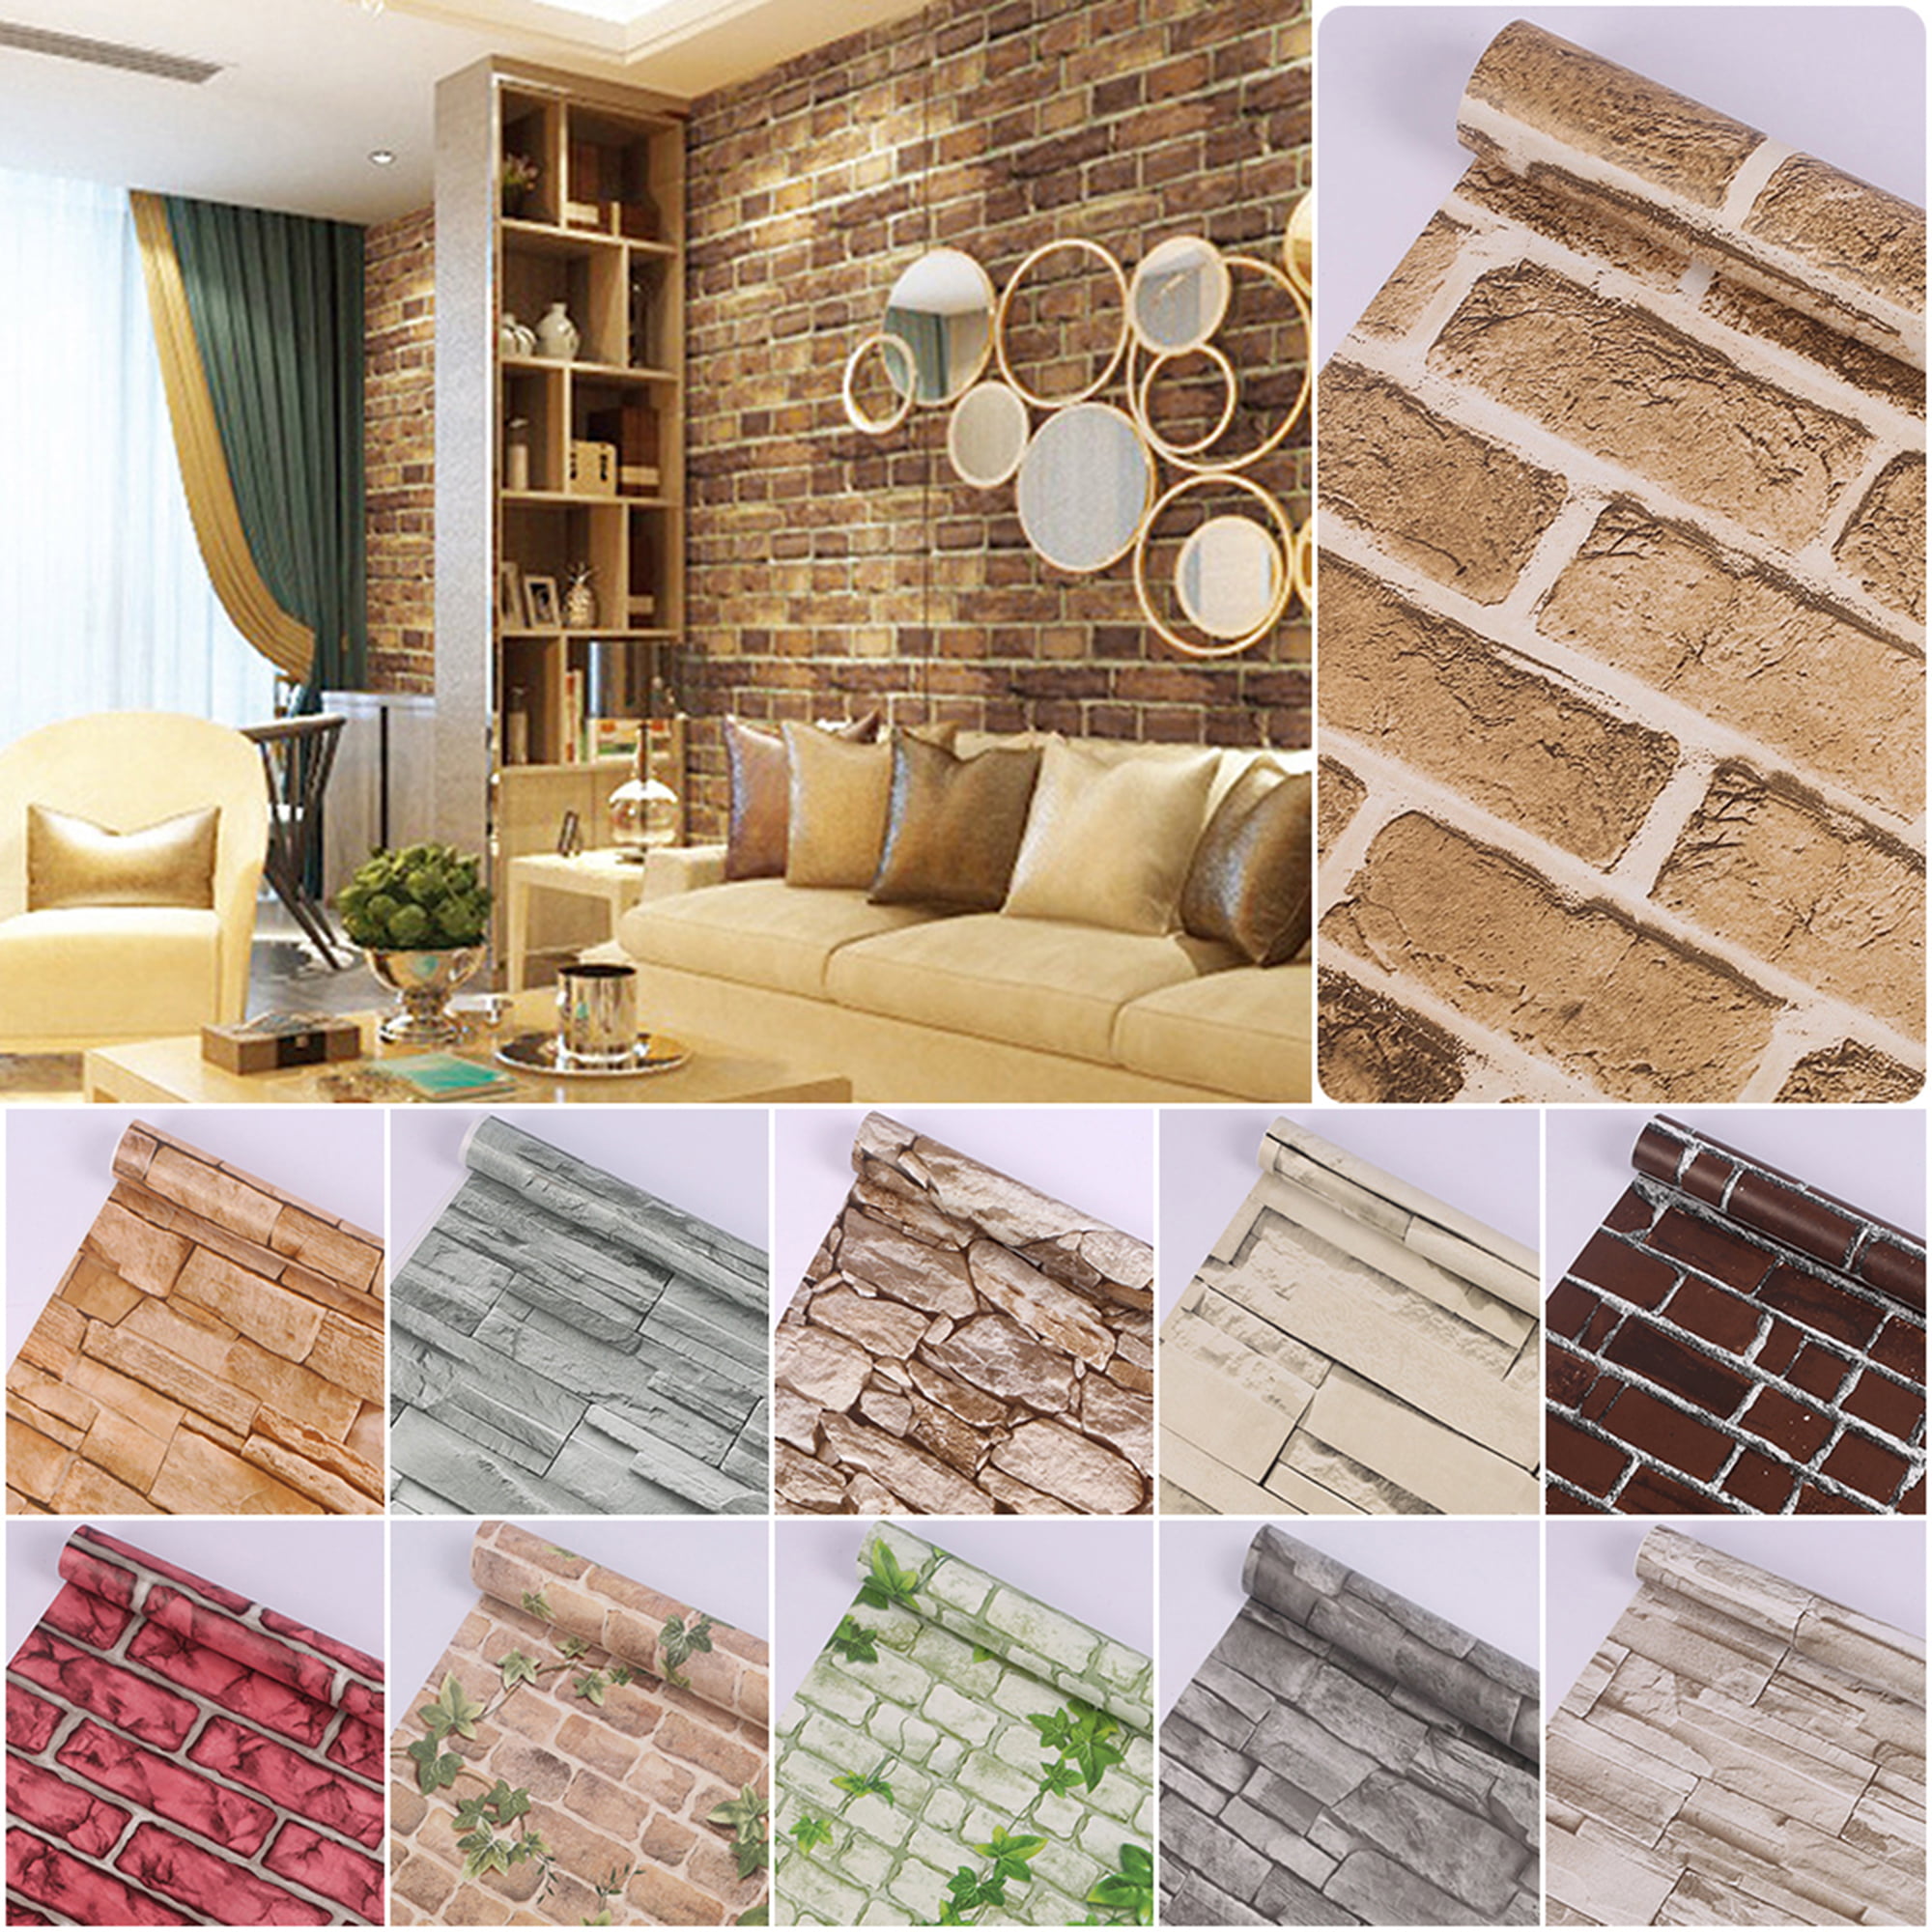 10M 3D VINTAGE NATURAL REALISTIC BRICK STONE TEXTURED NON-WOVEN WALLPAPER ROLL